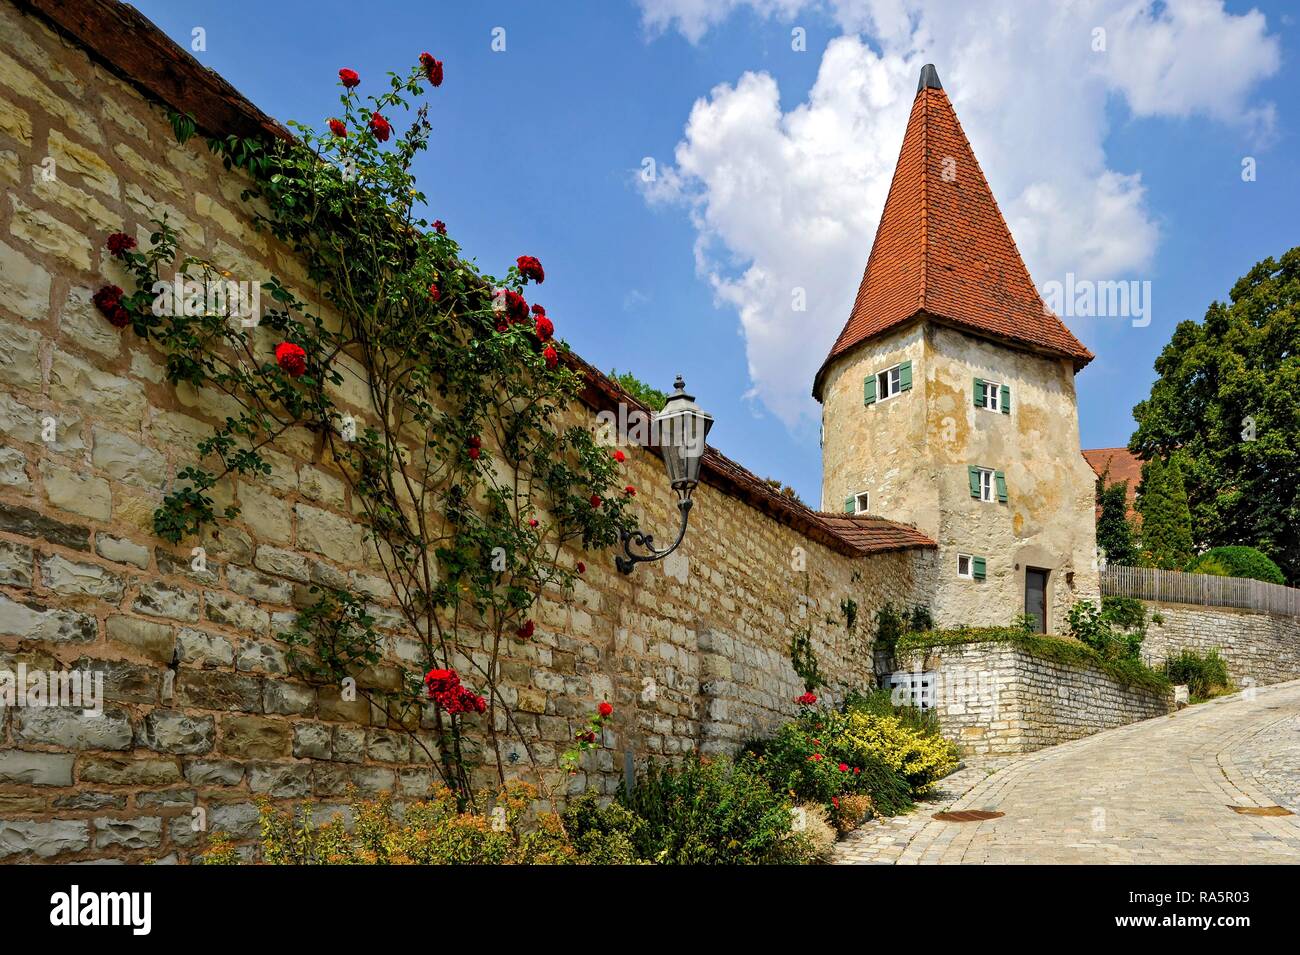 Medieval city wall with defensive defence tower, old town, Greding, Middle Franconia, Franconia, Bavaria, Germany Stock Photo